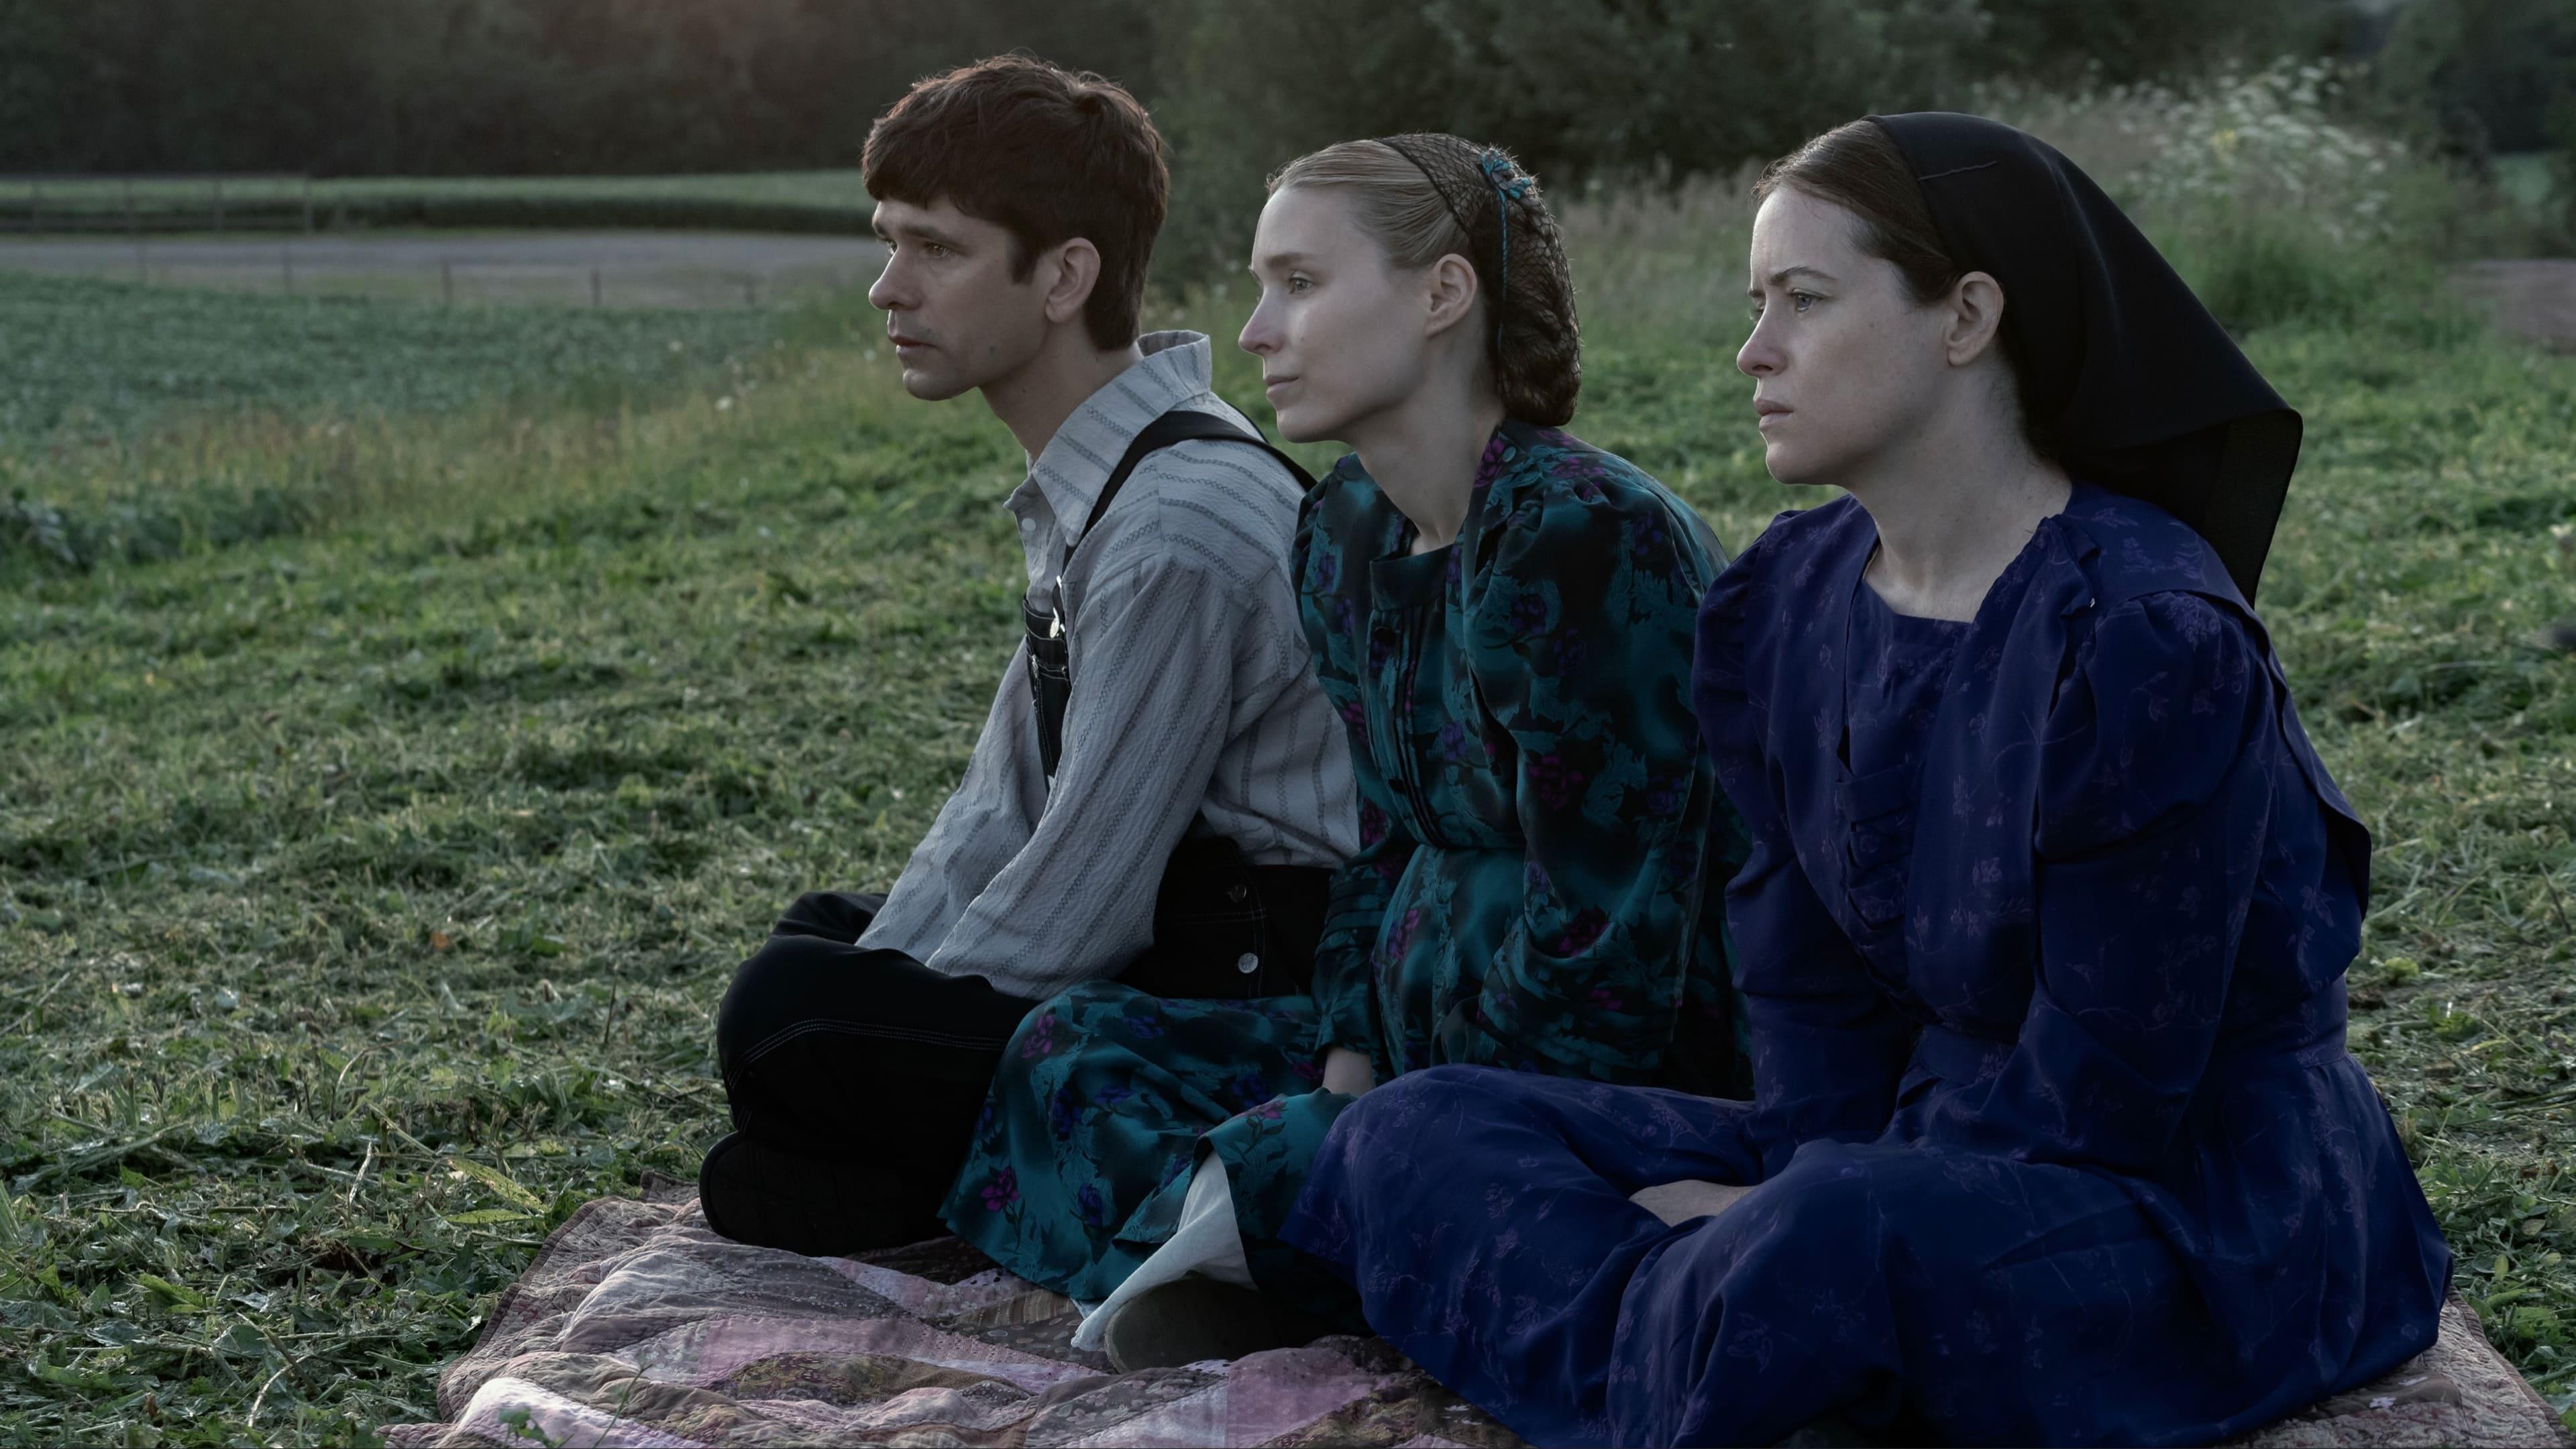 On a grassy plain sits a young man and two young women in period attire, staring blankly into the distance.